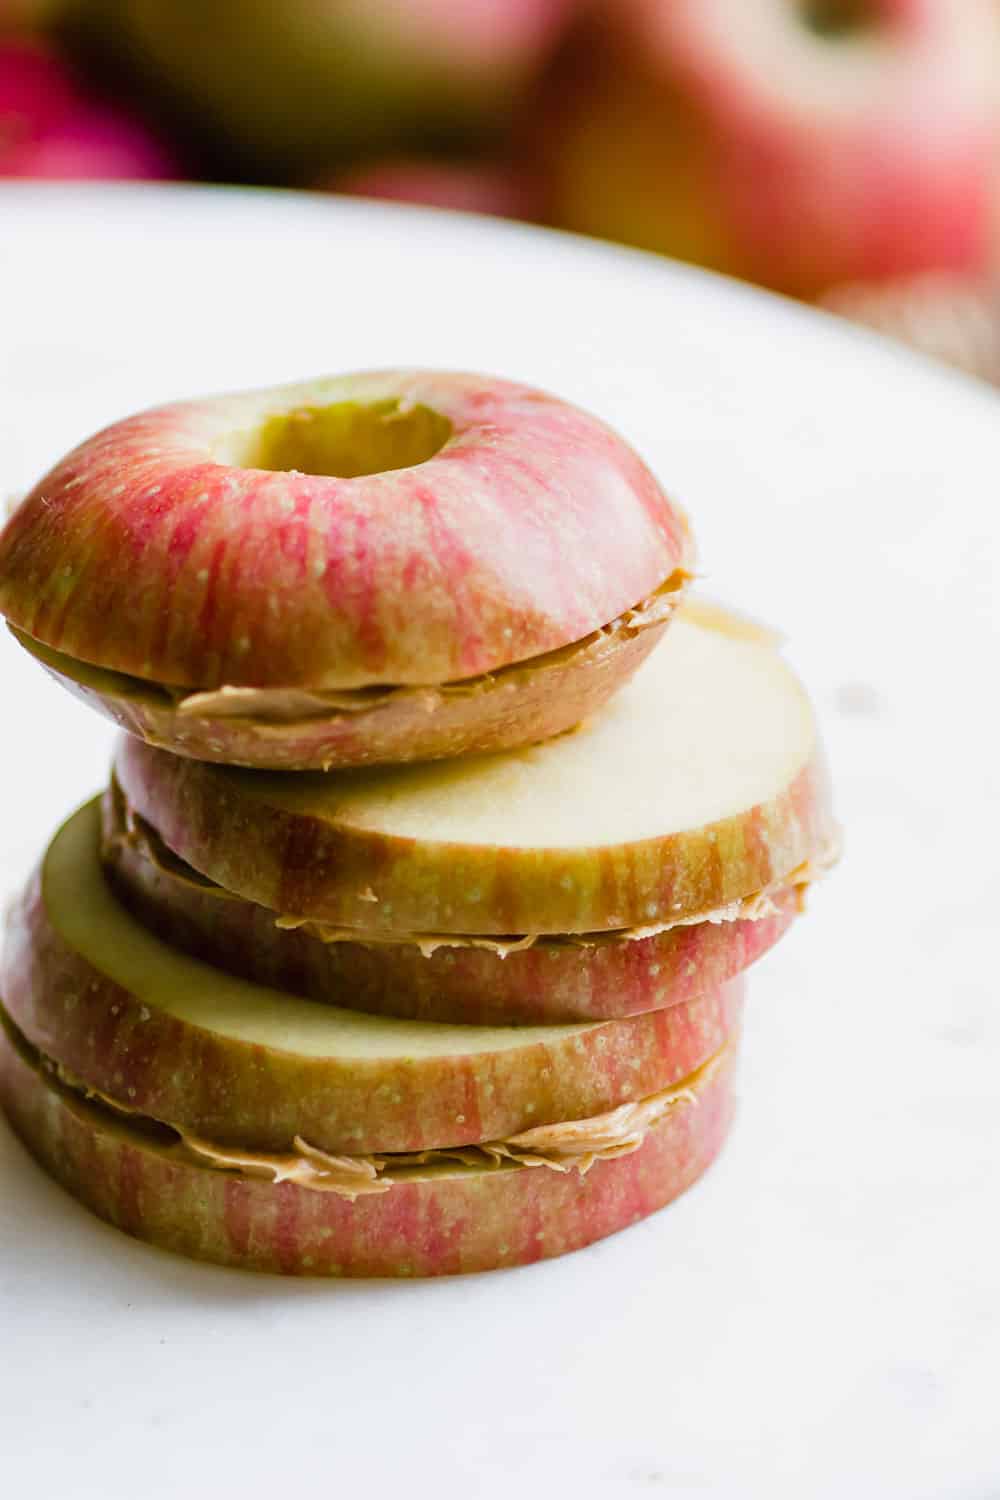 stack of three apple and peanut butter sandwiches